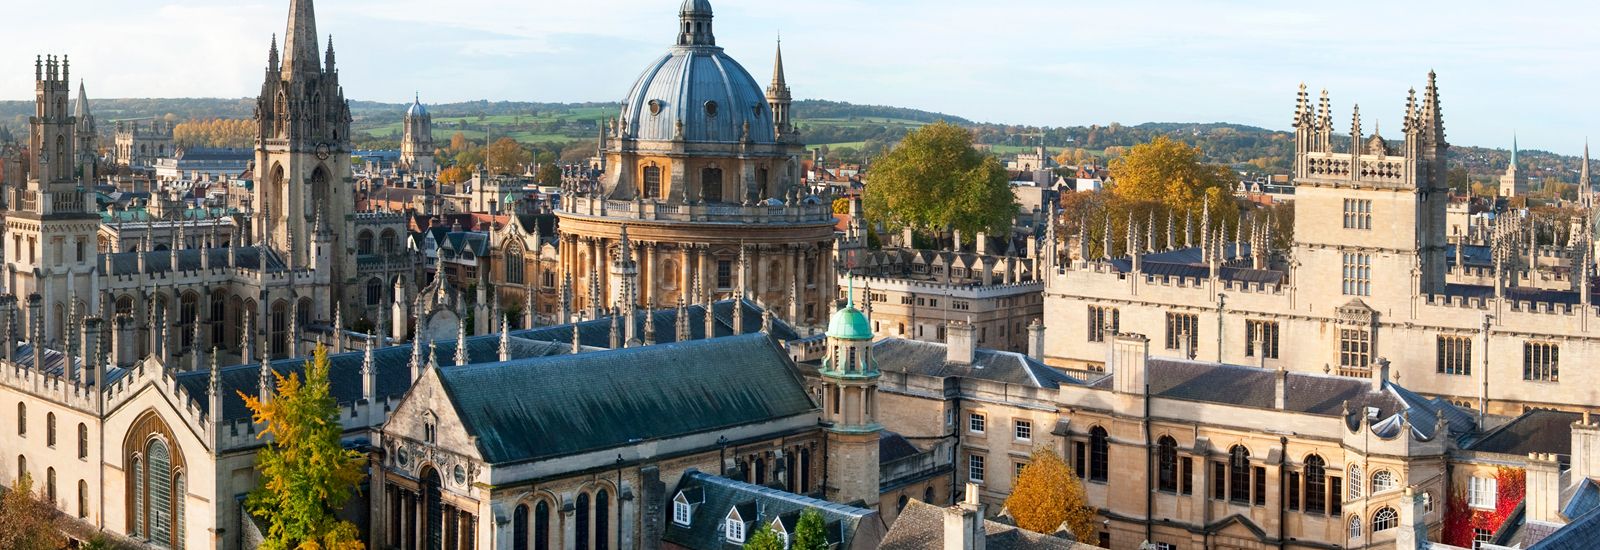 A-Z of colleges | University of Oxford